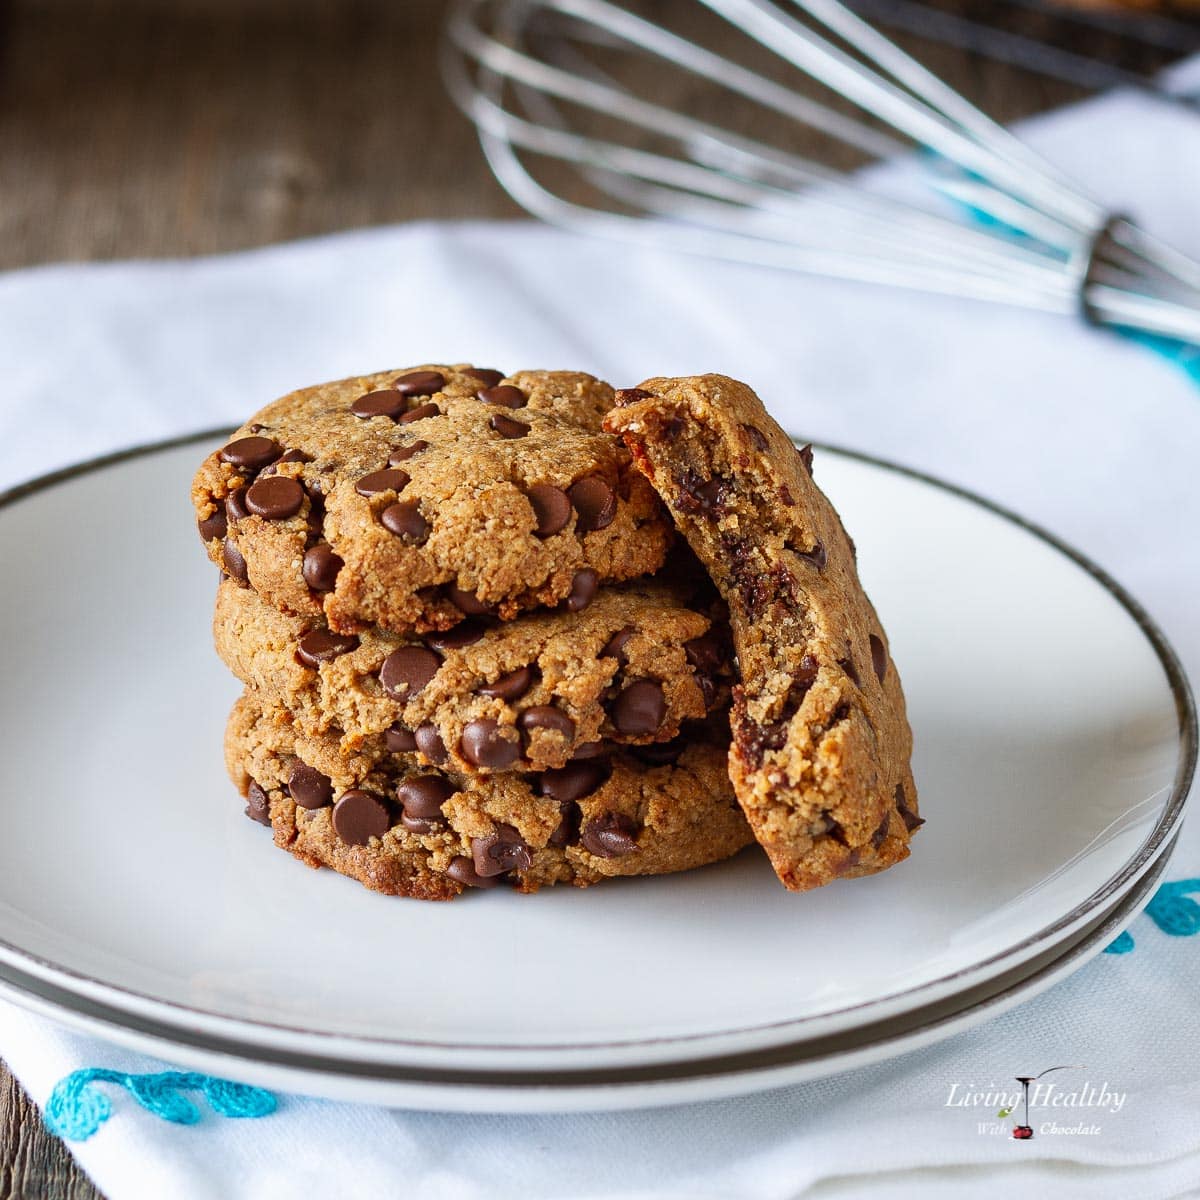 Egg-free Chocolate Chip Cookies (Paleo, Vegan, dairy-free, grain-free, gluten-free) by #LivingHealthyWithChocolate